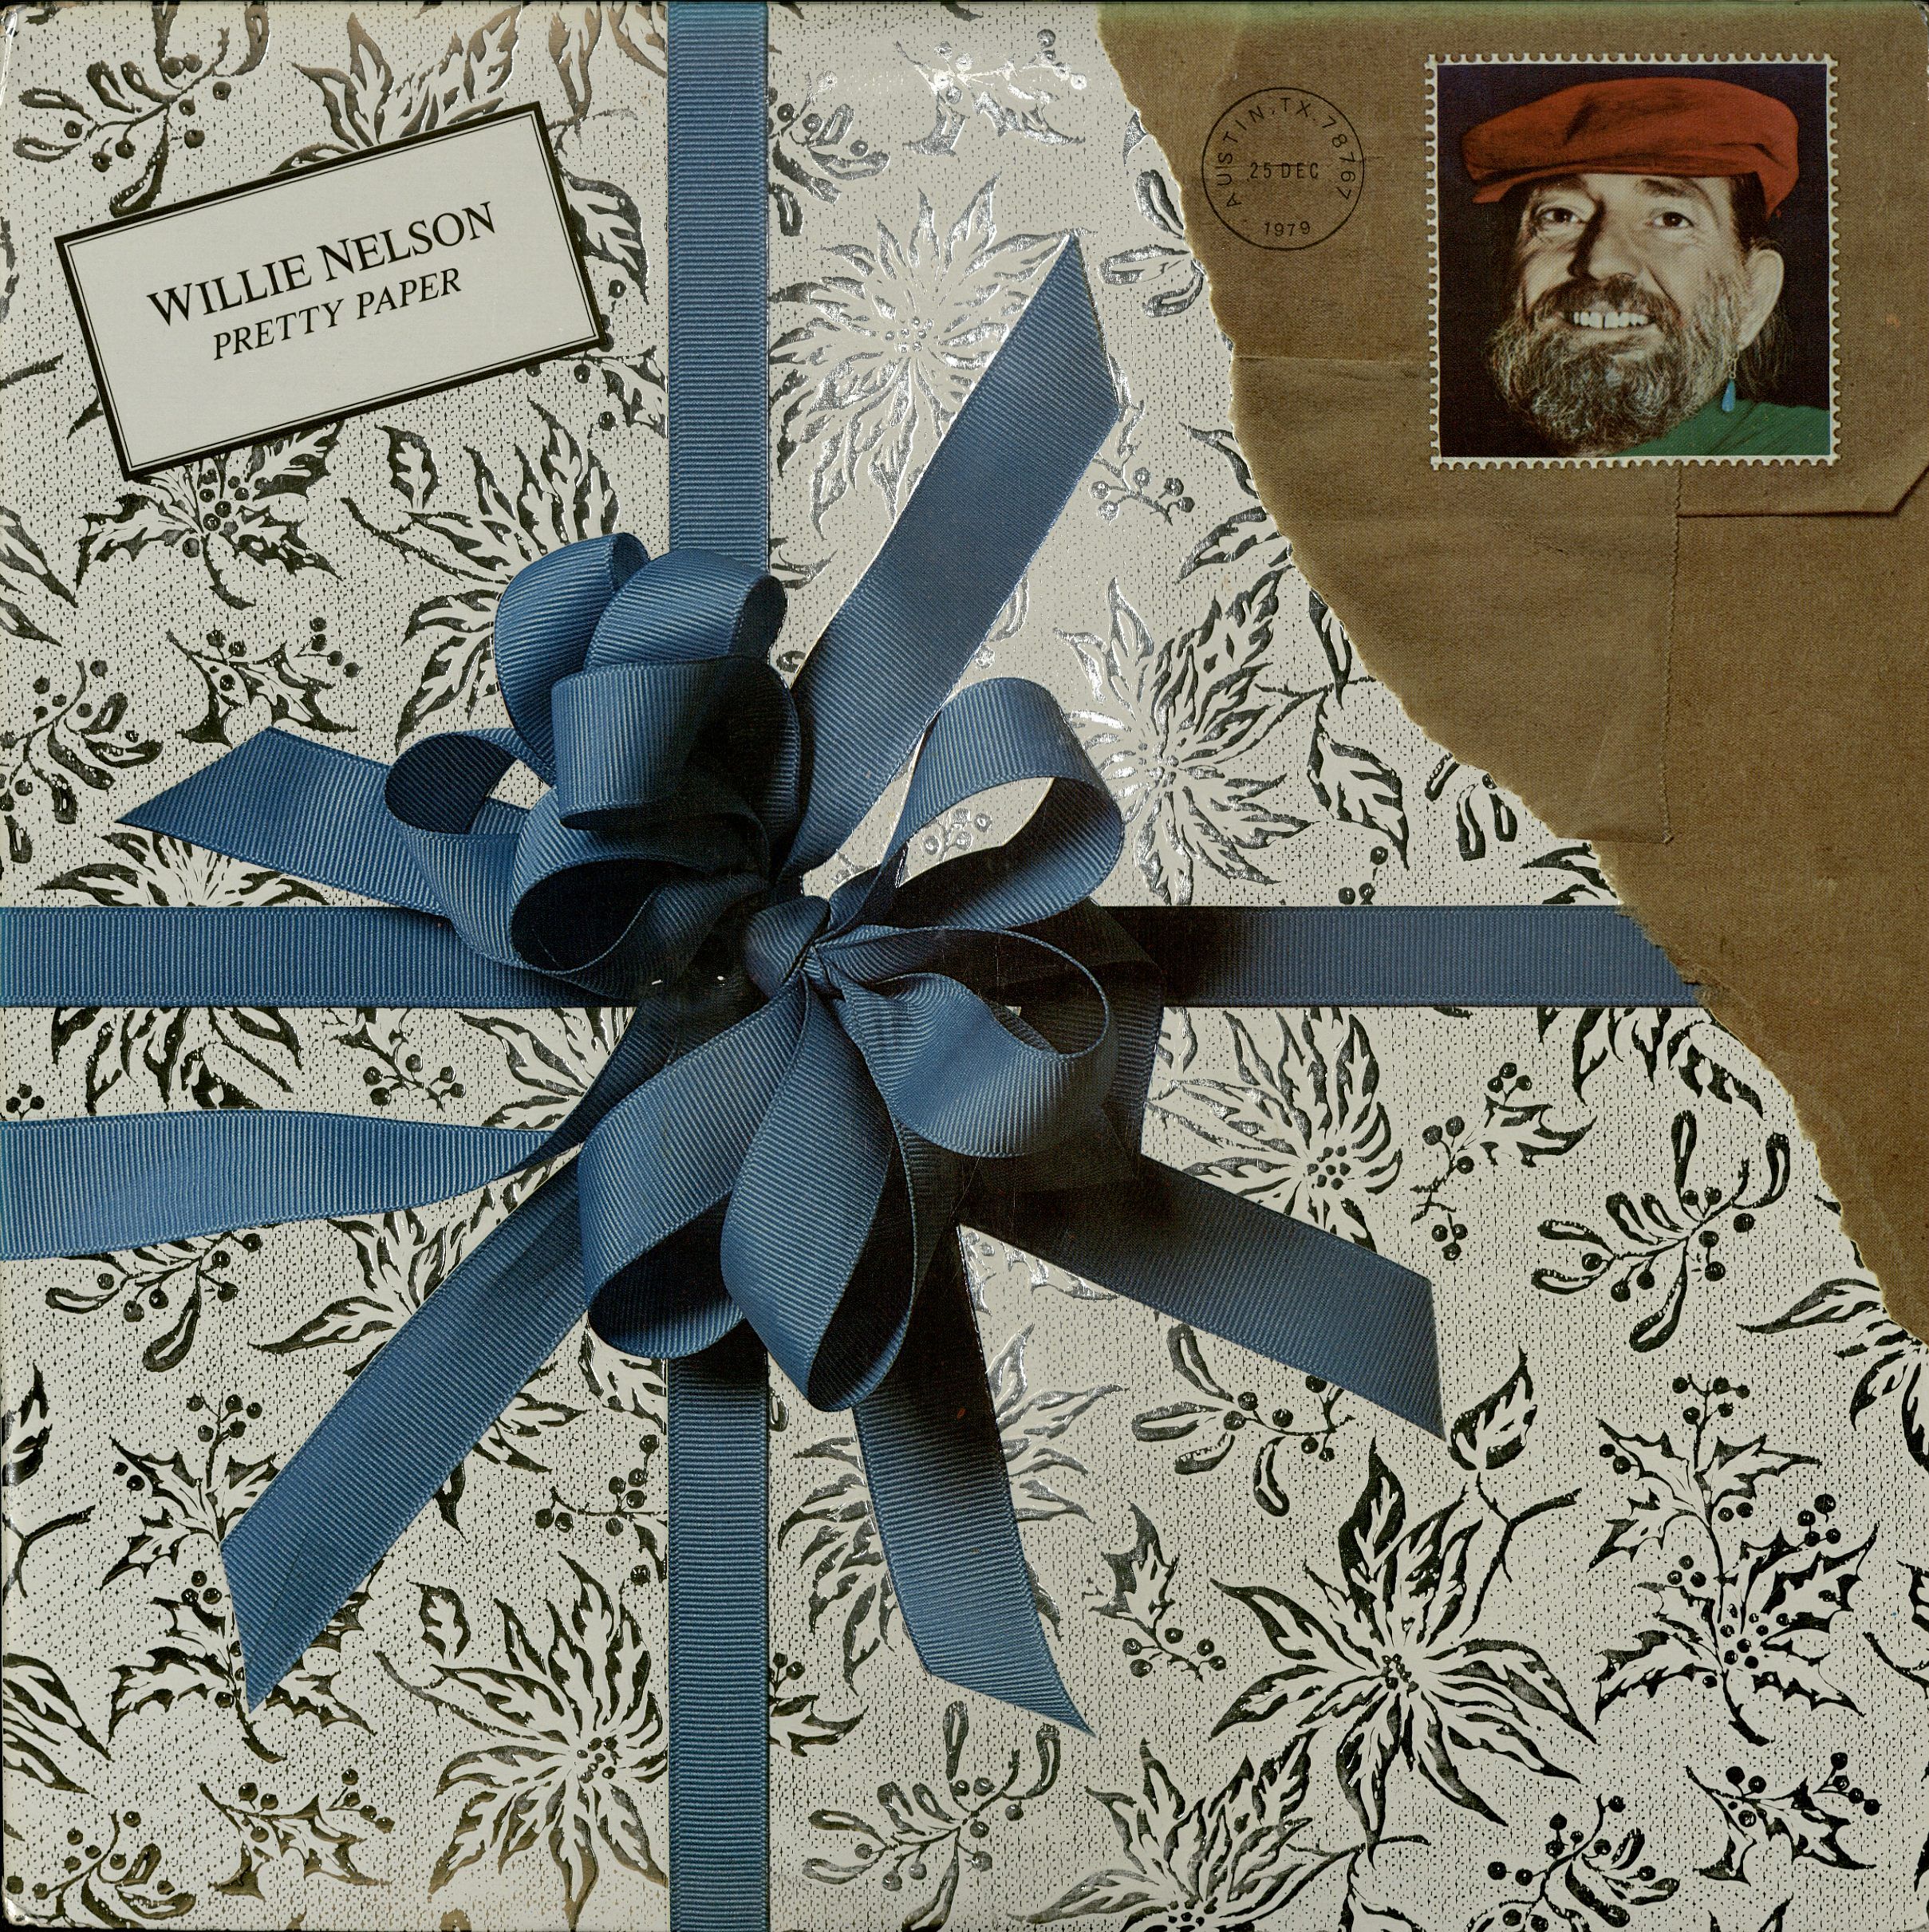 A Holiday Parcel c/o the Red-Headed Stranger